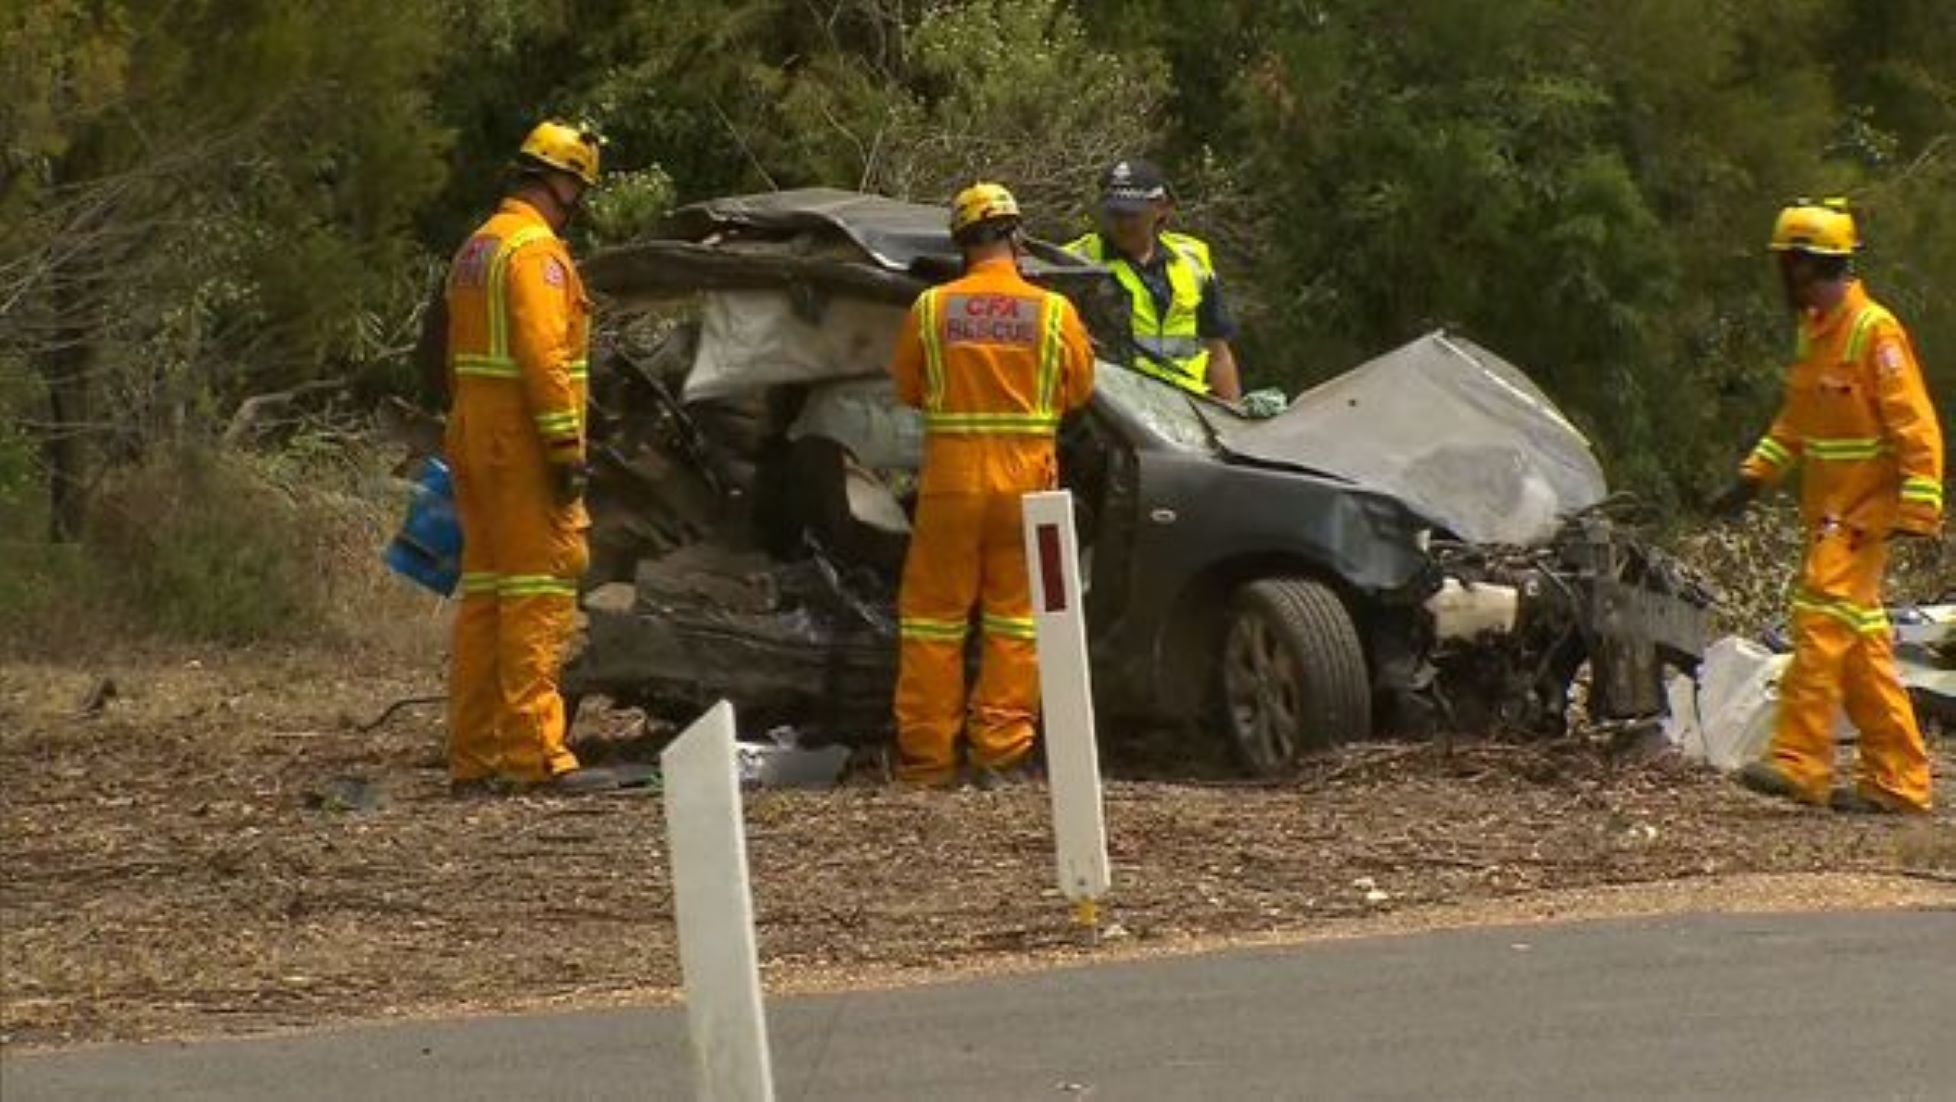 Four Teenagers Died, Another Seriously Injured In Car Crash In Australia